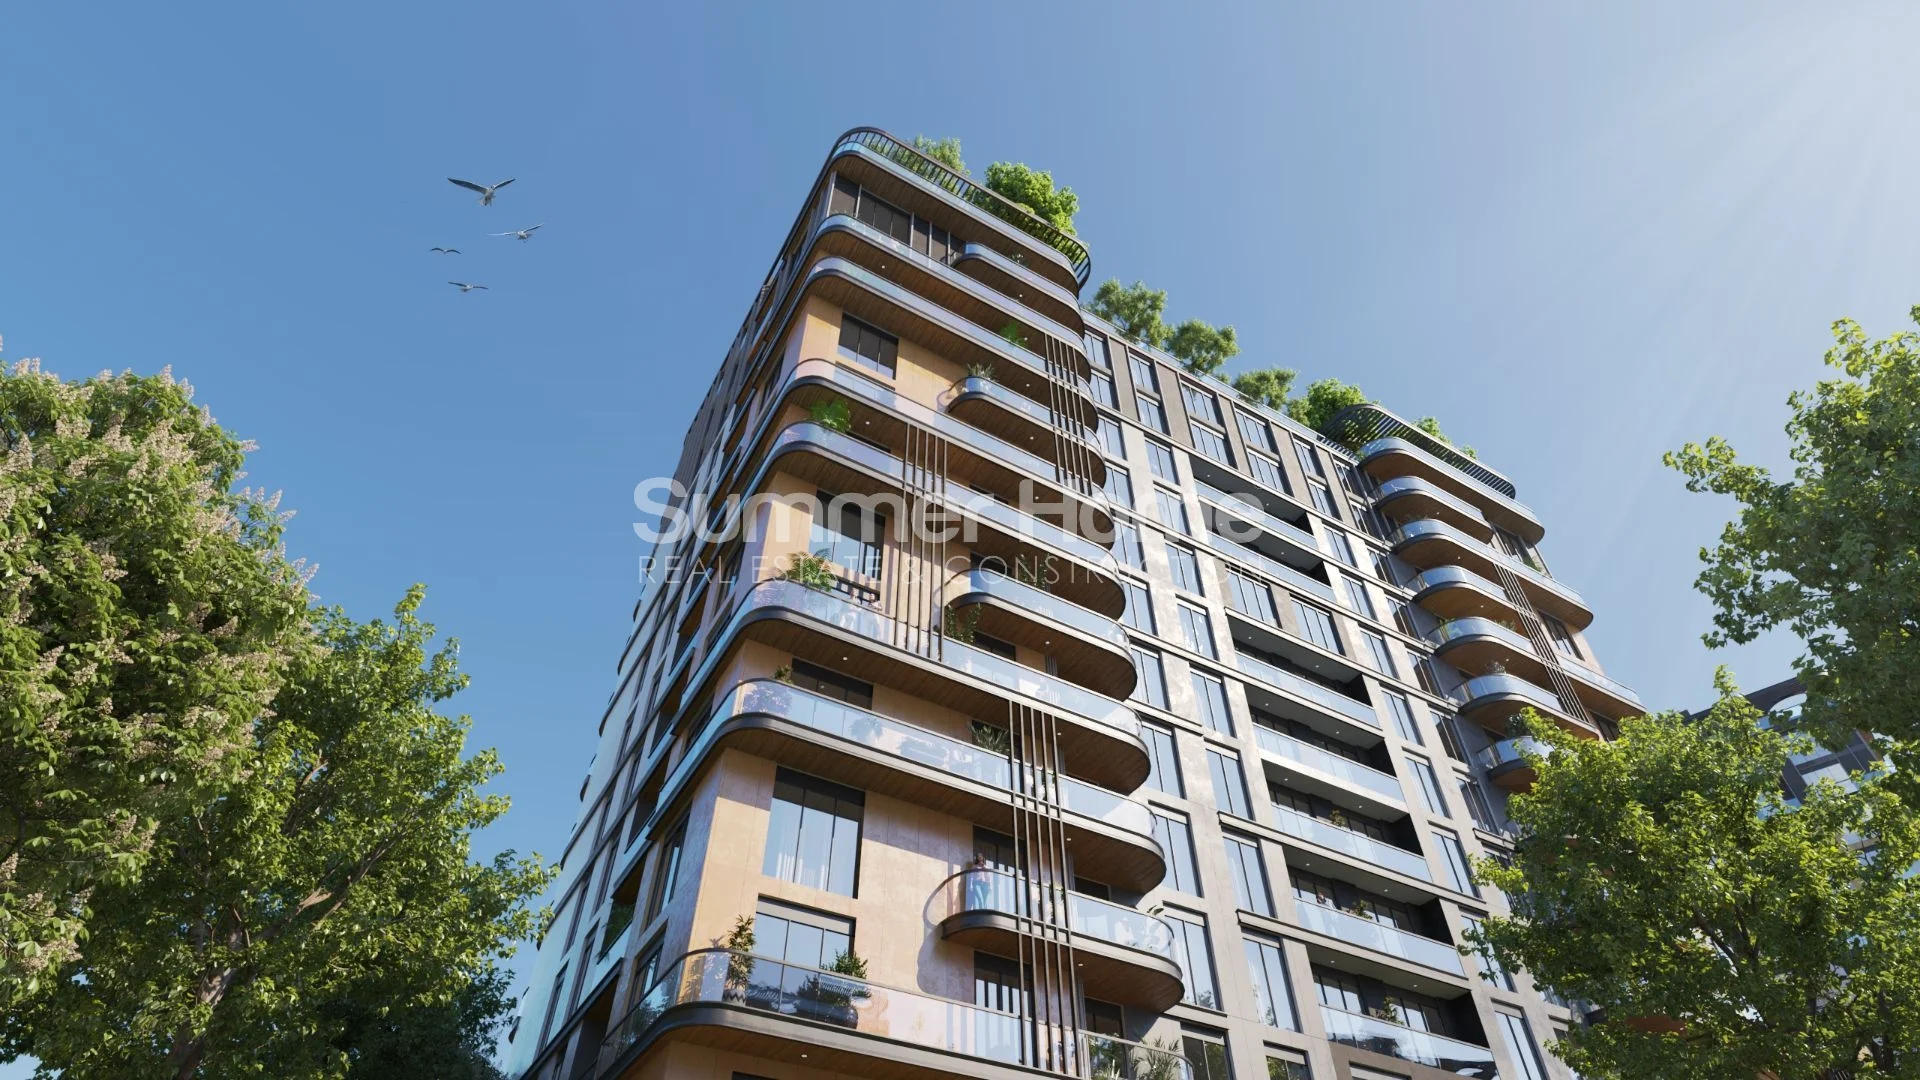 Gorgeous apartments in the Bahcelievler district of Istanbul General - 8